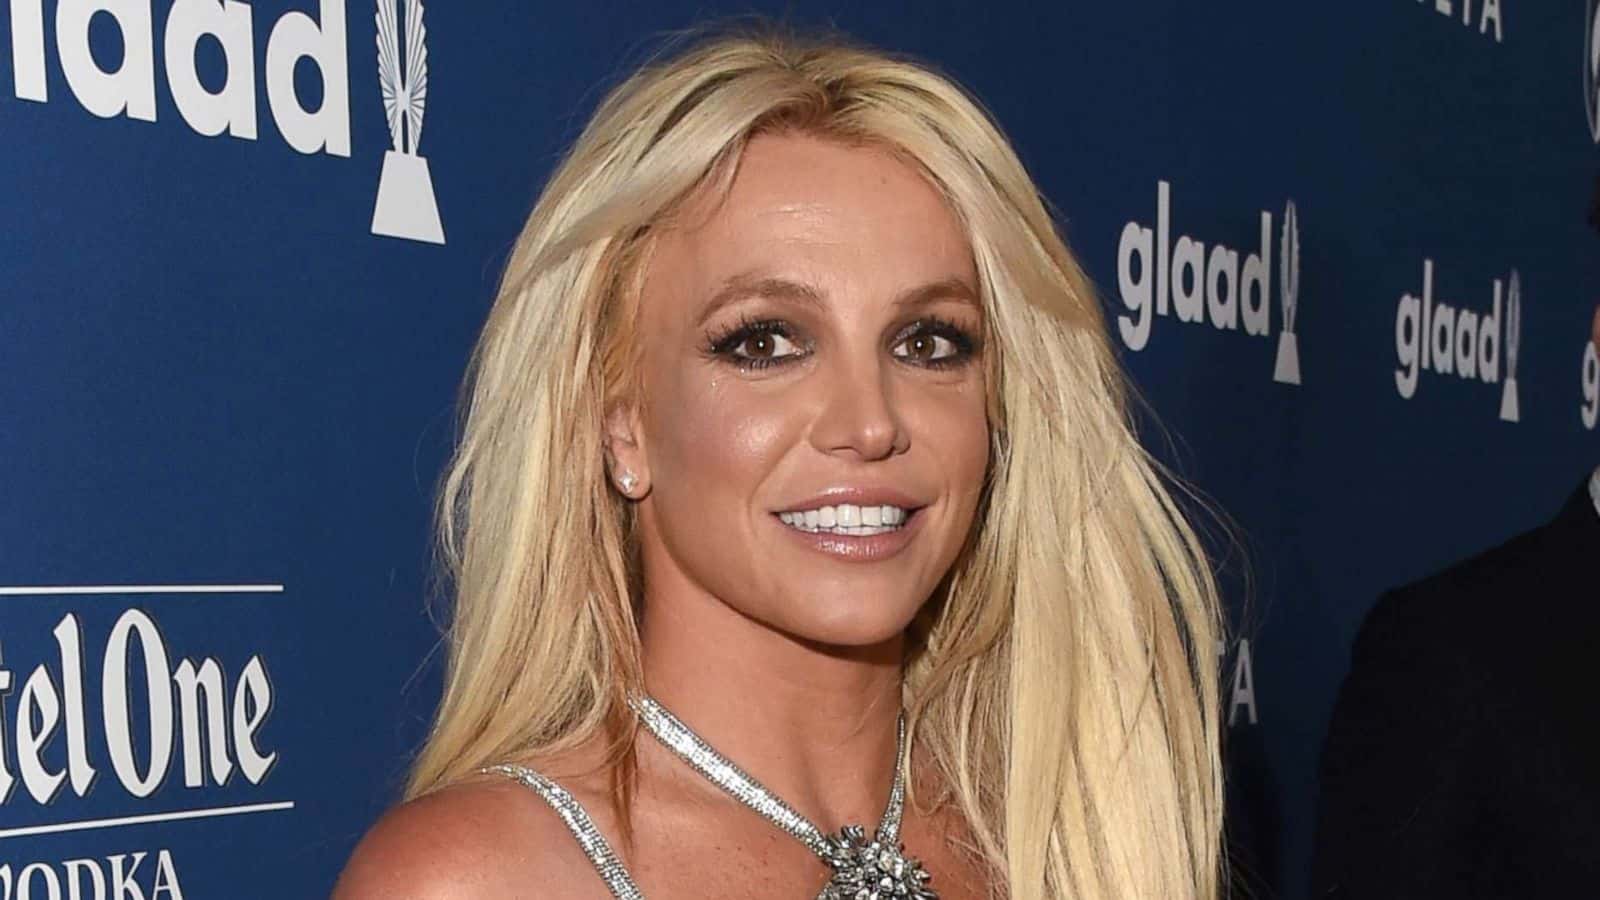 Britney Spears' Conservatorship Is Over